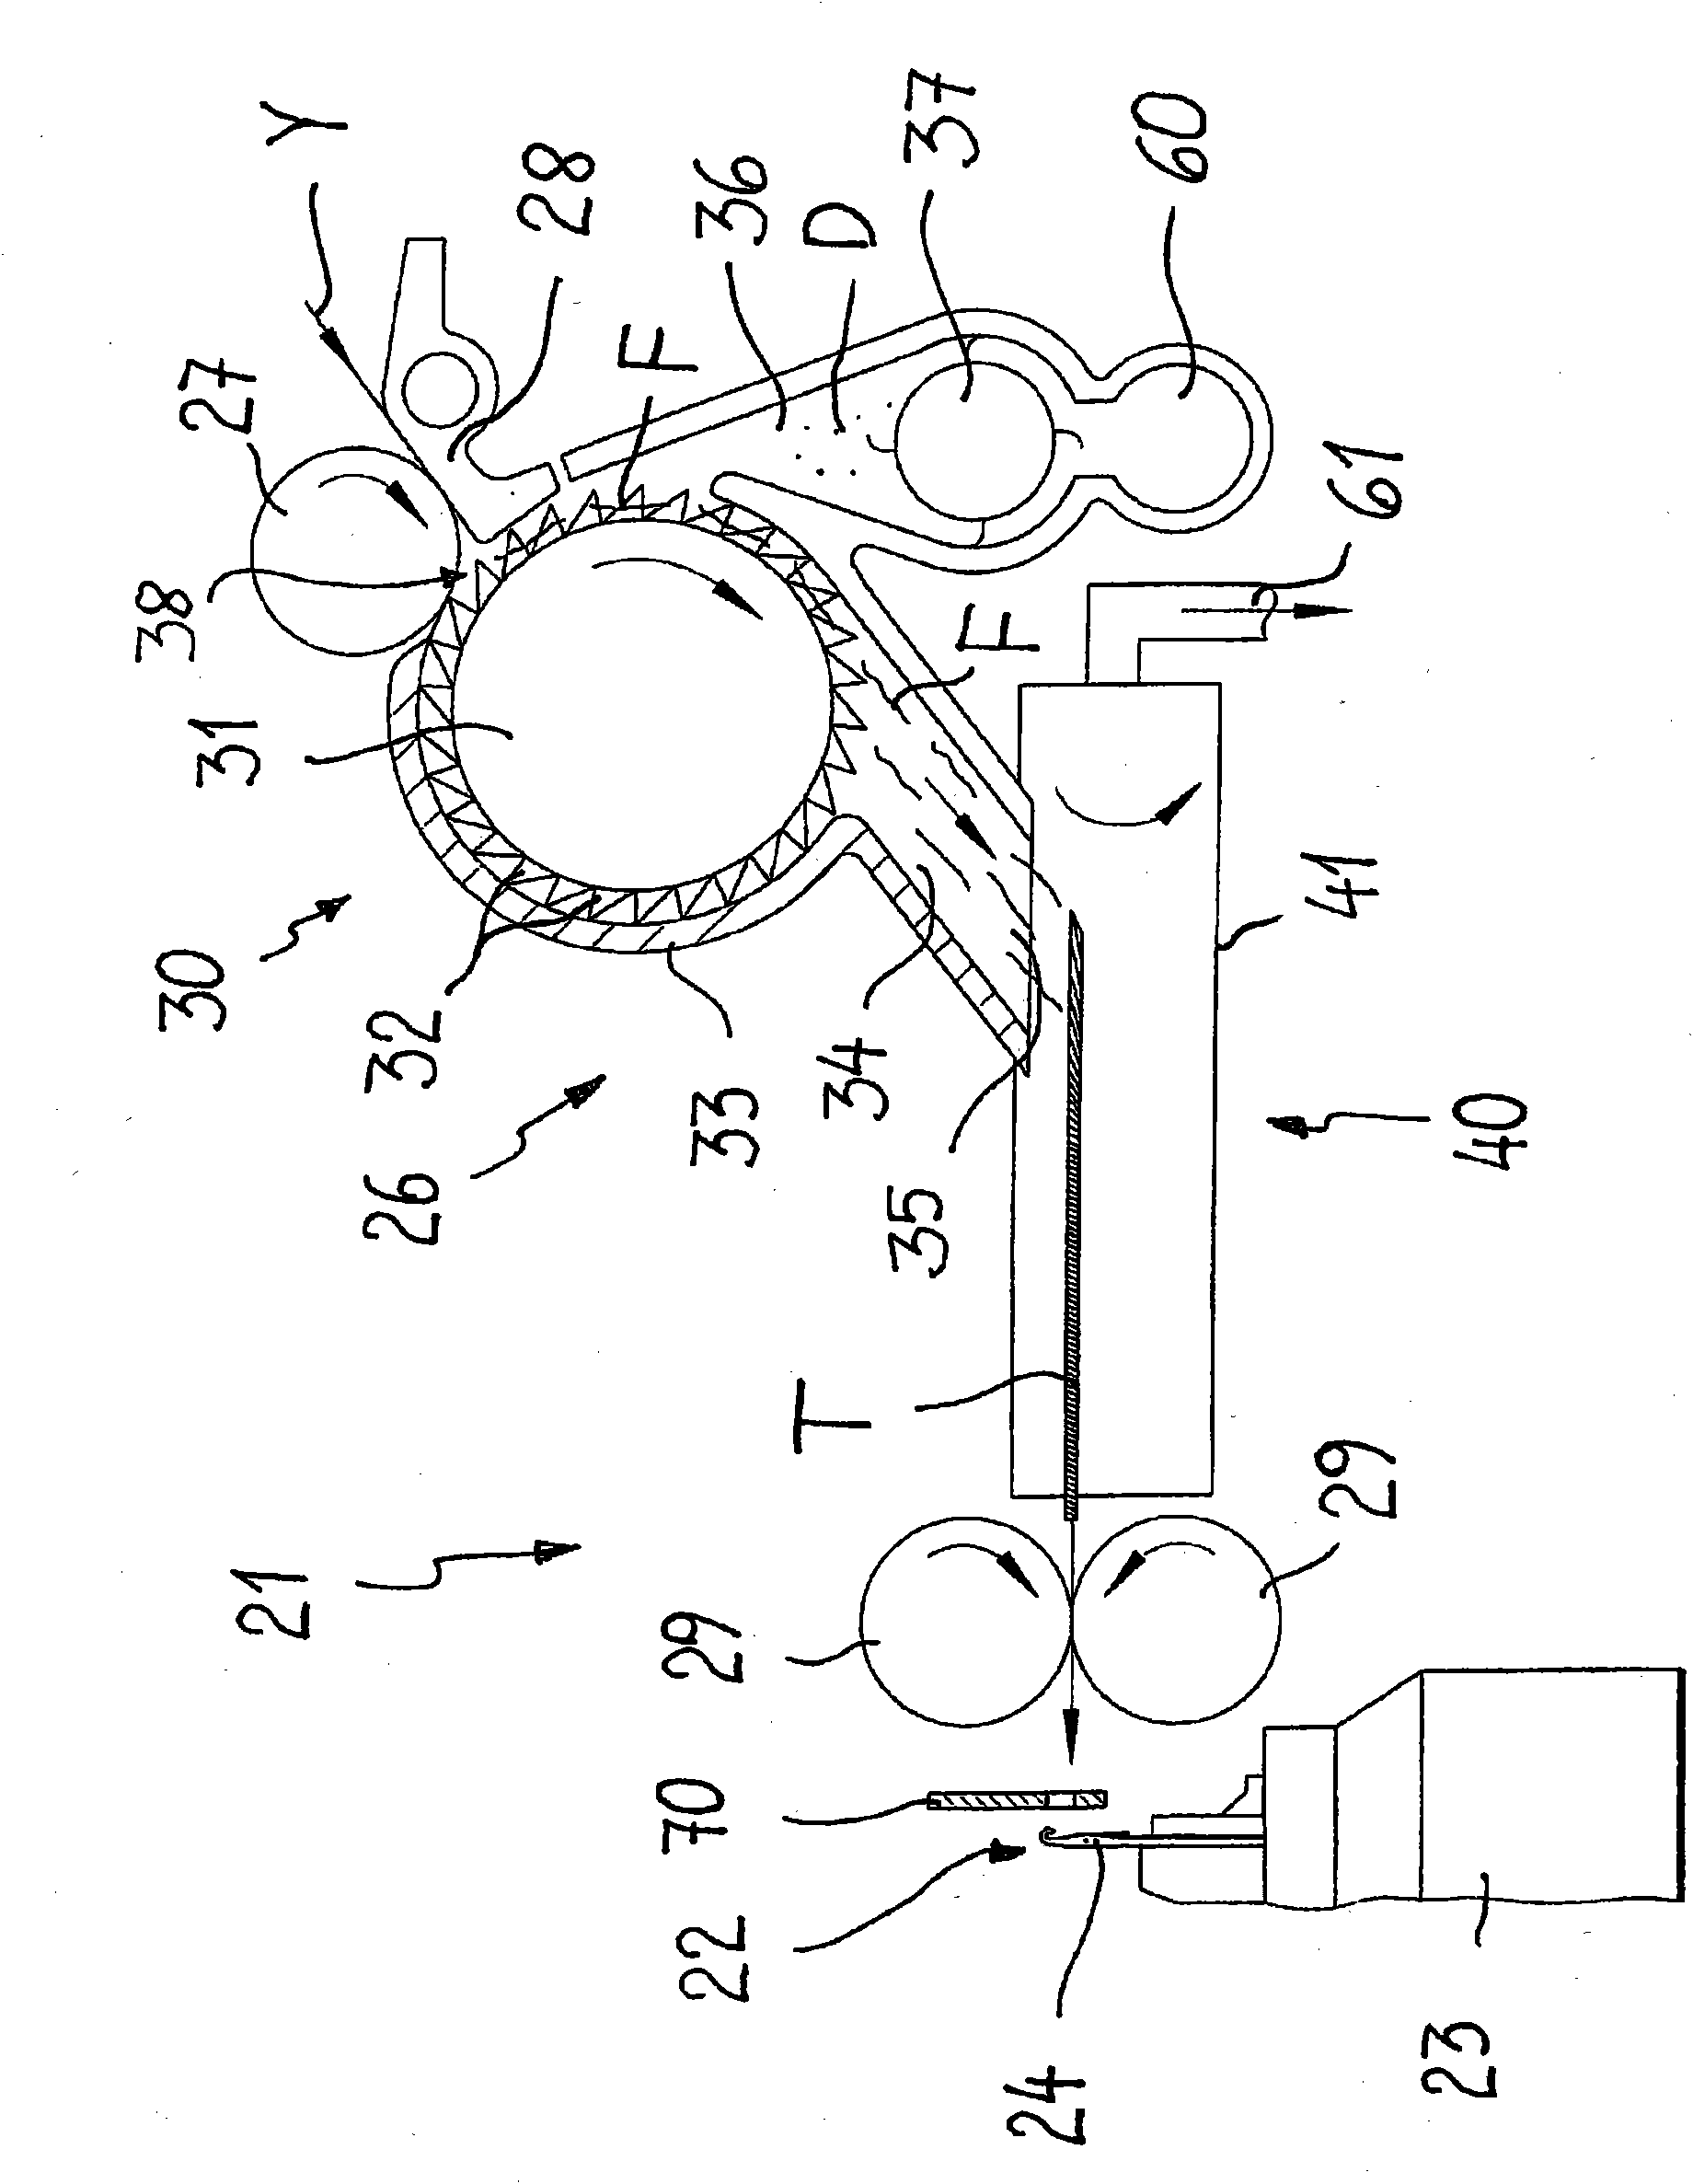 Knitting machine and method for producing knitted fabrics from rovings